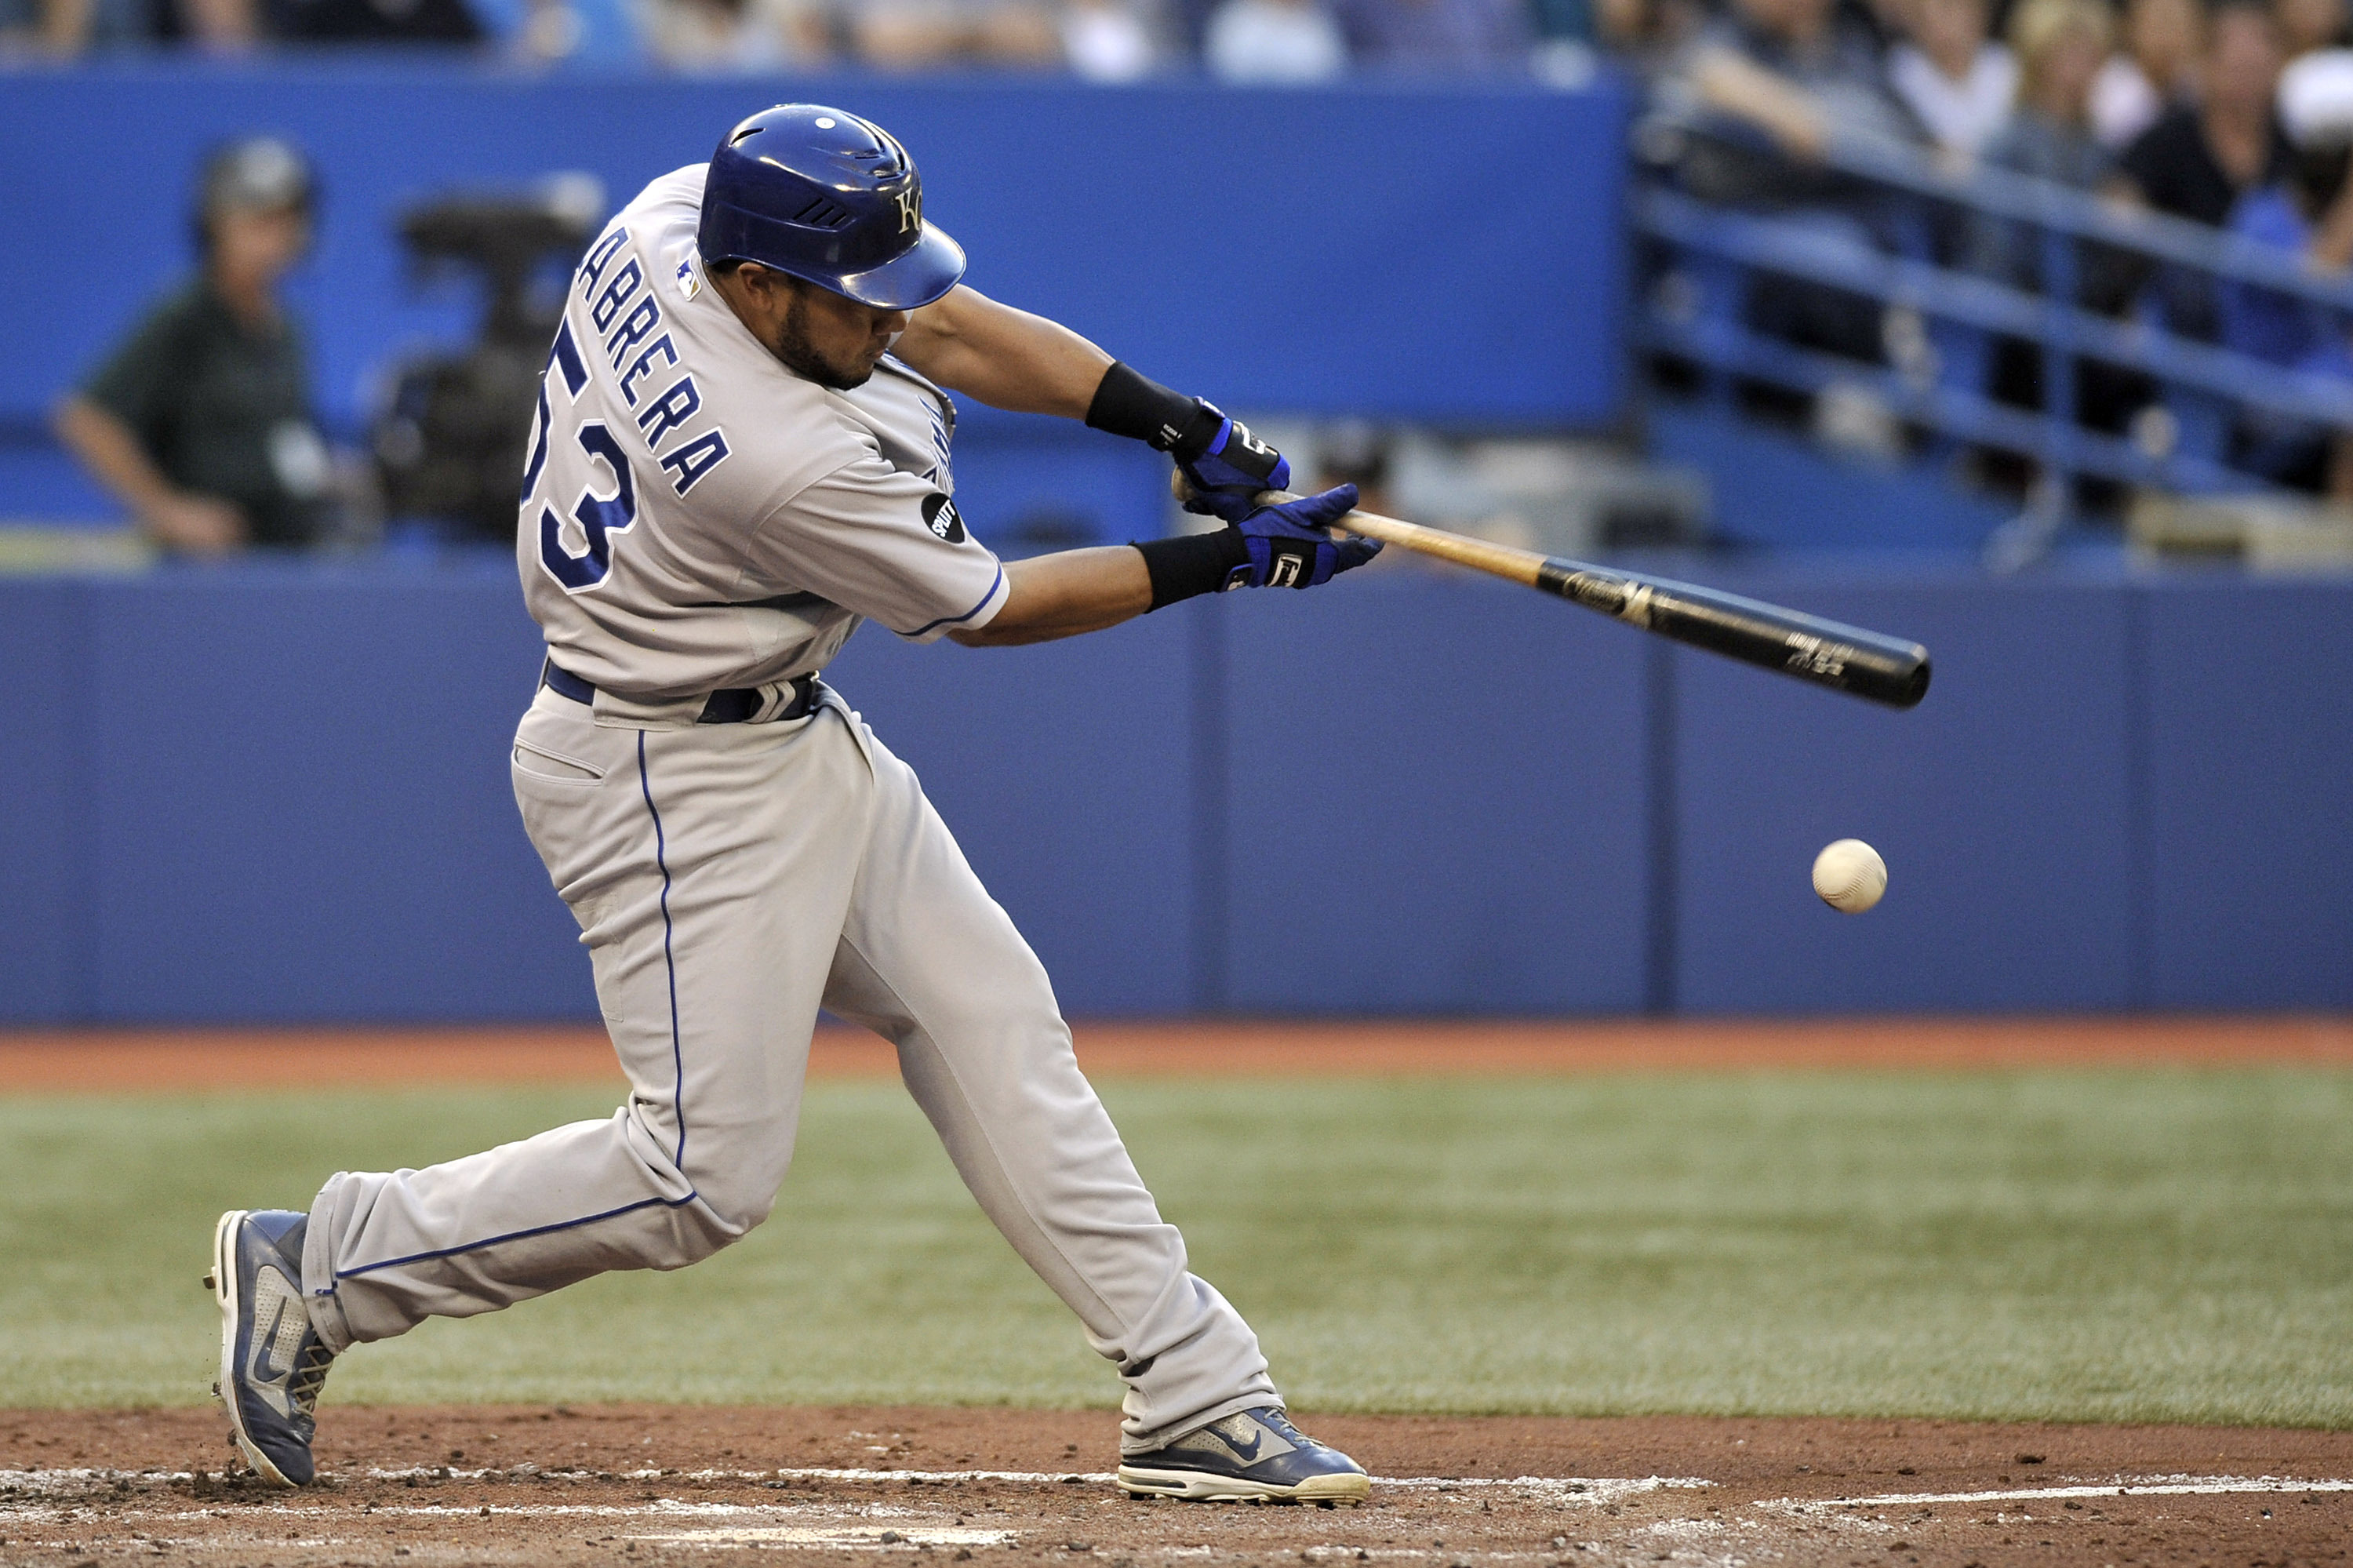 Blue Jays' Melky Cabrera to receive World Series ring during